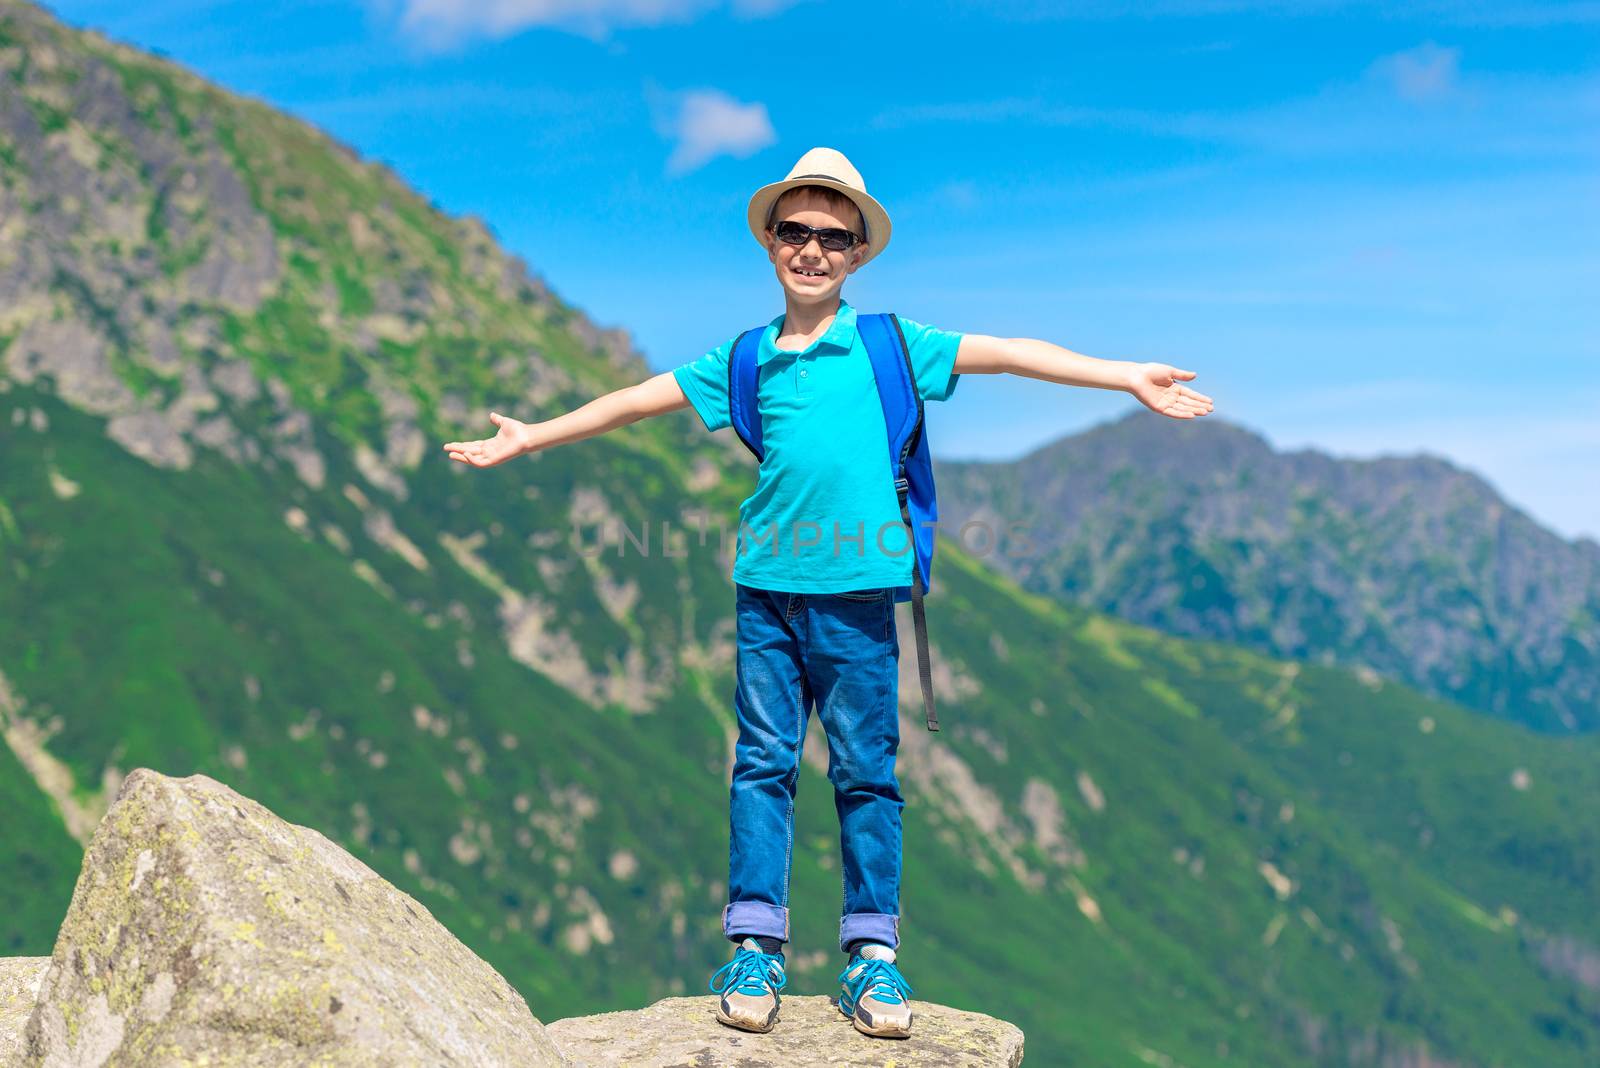 traveler boy enjoys the beauty of the mountains and freedom standing on the rock